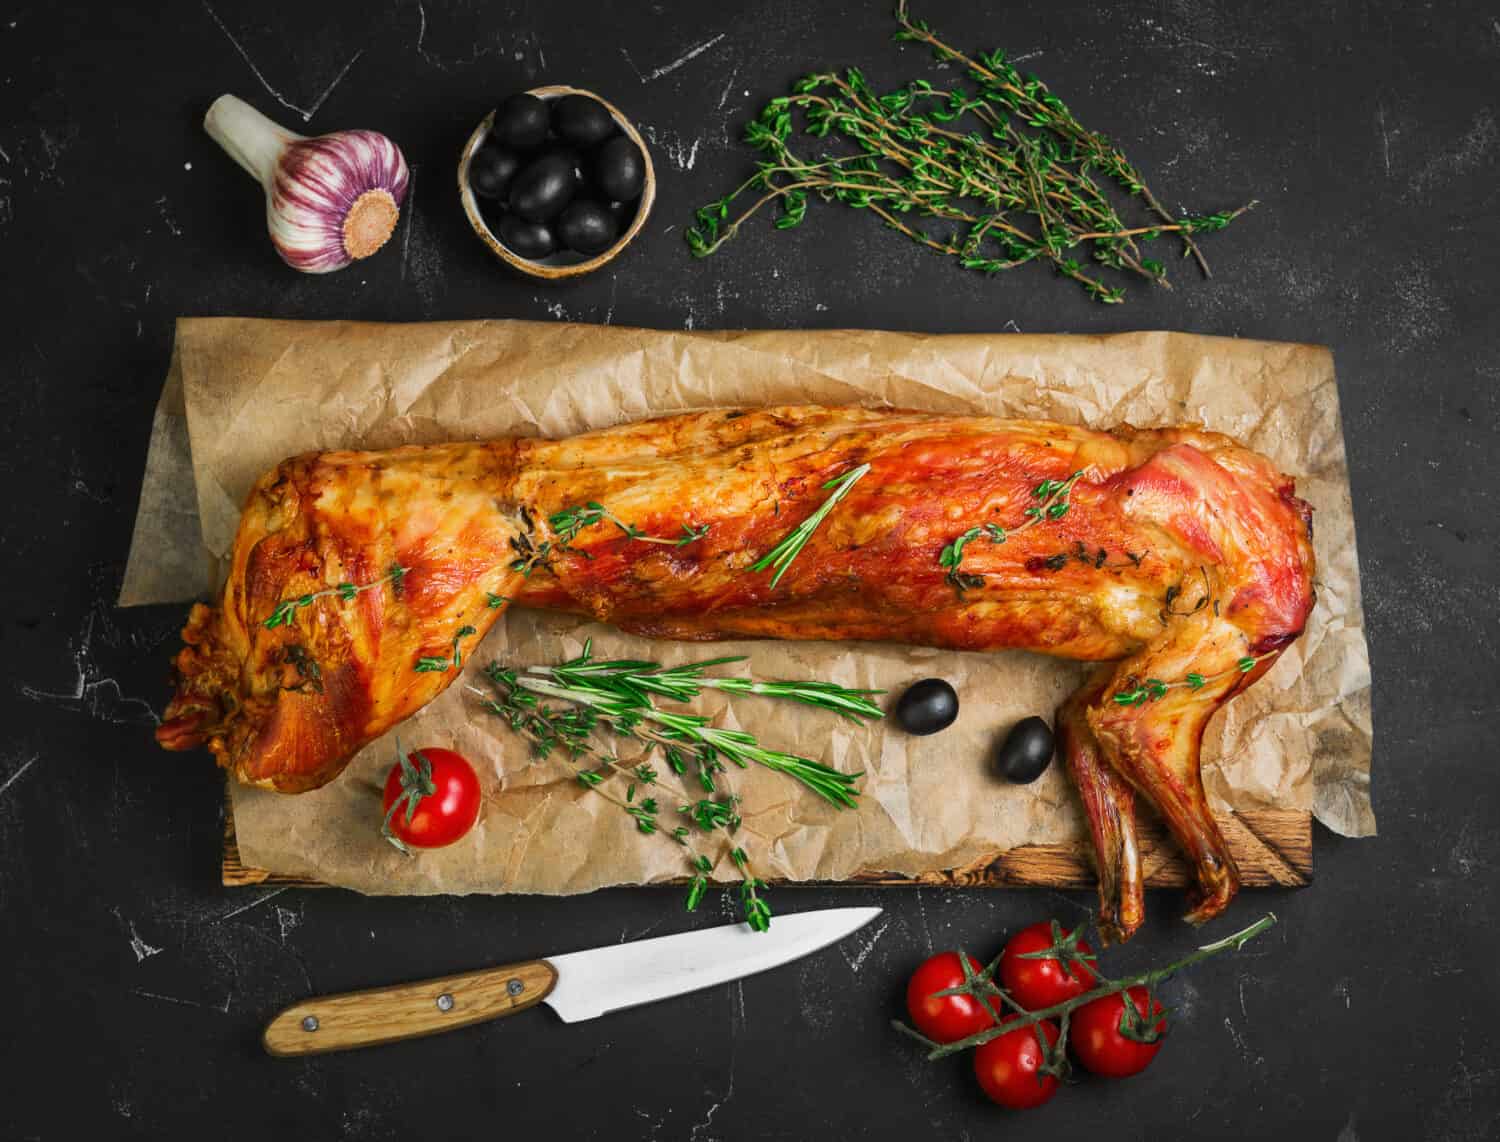 Roast baked whole rabbit on wooden board on paper. Ingredients for baked rabbit rosemary, thyme, cherry tomatoes, garlic, olives on dark background. A festive meal. Top view.  